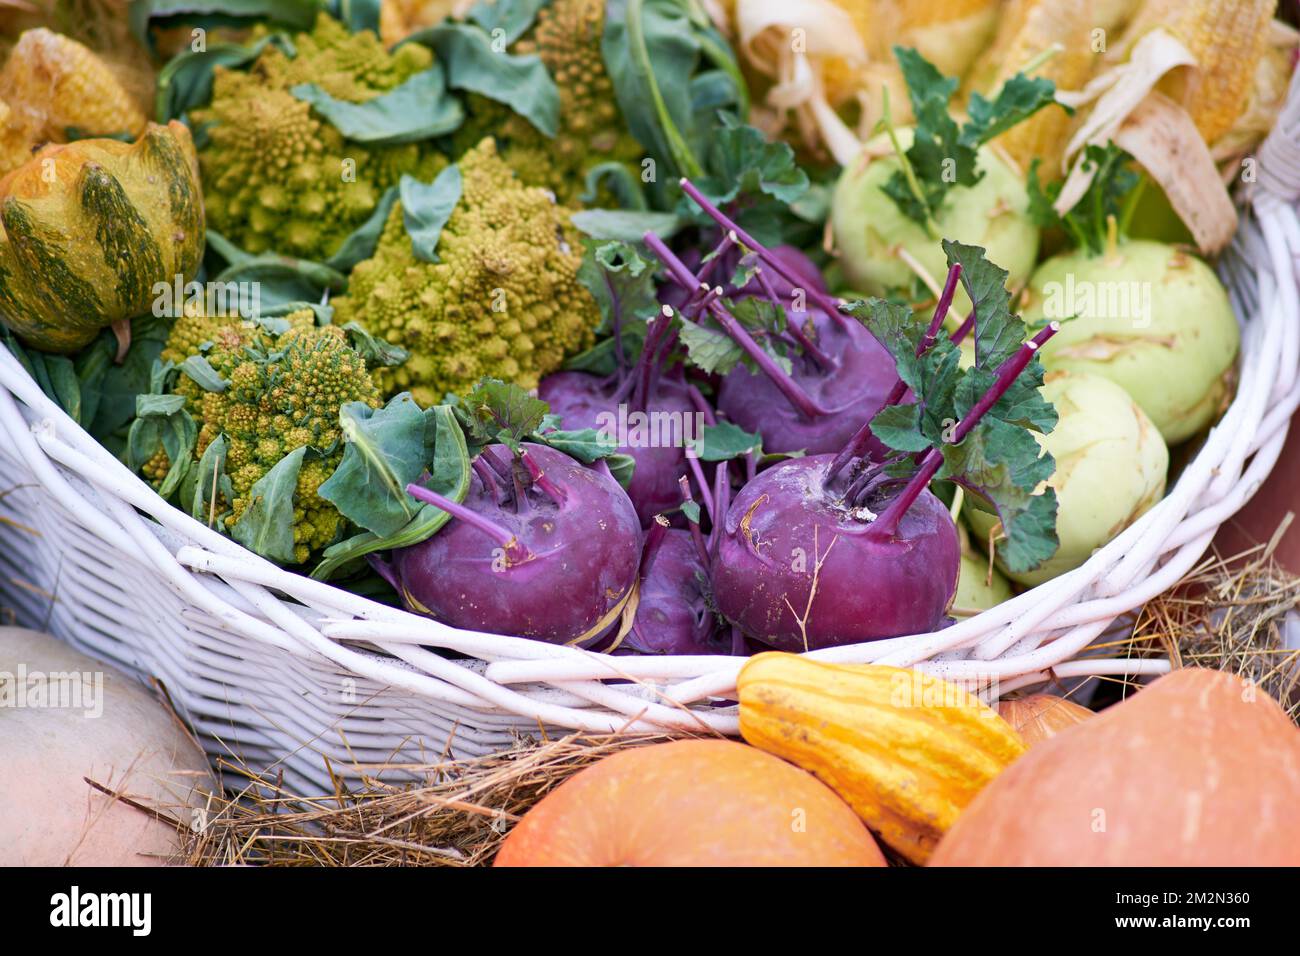 Harvest festival with autumn pumpkins and vegetables. Sale of agricultural crops on the outdoor market after the holiday Stock Photo